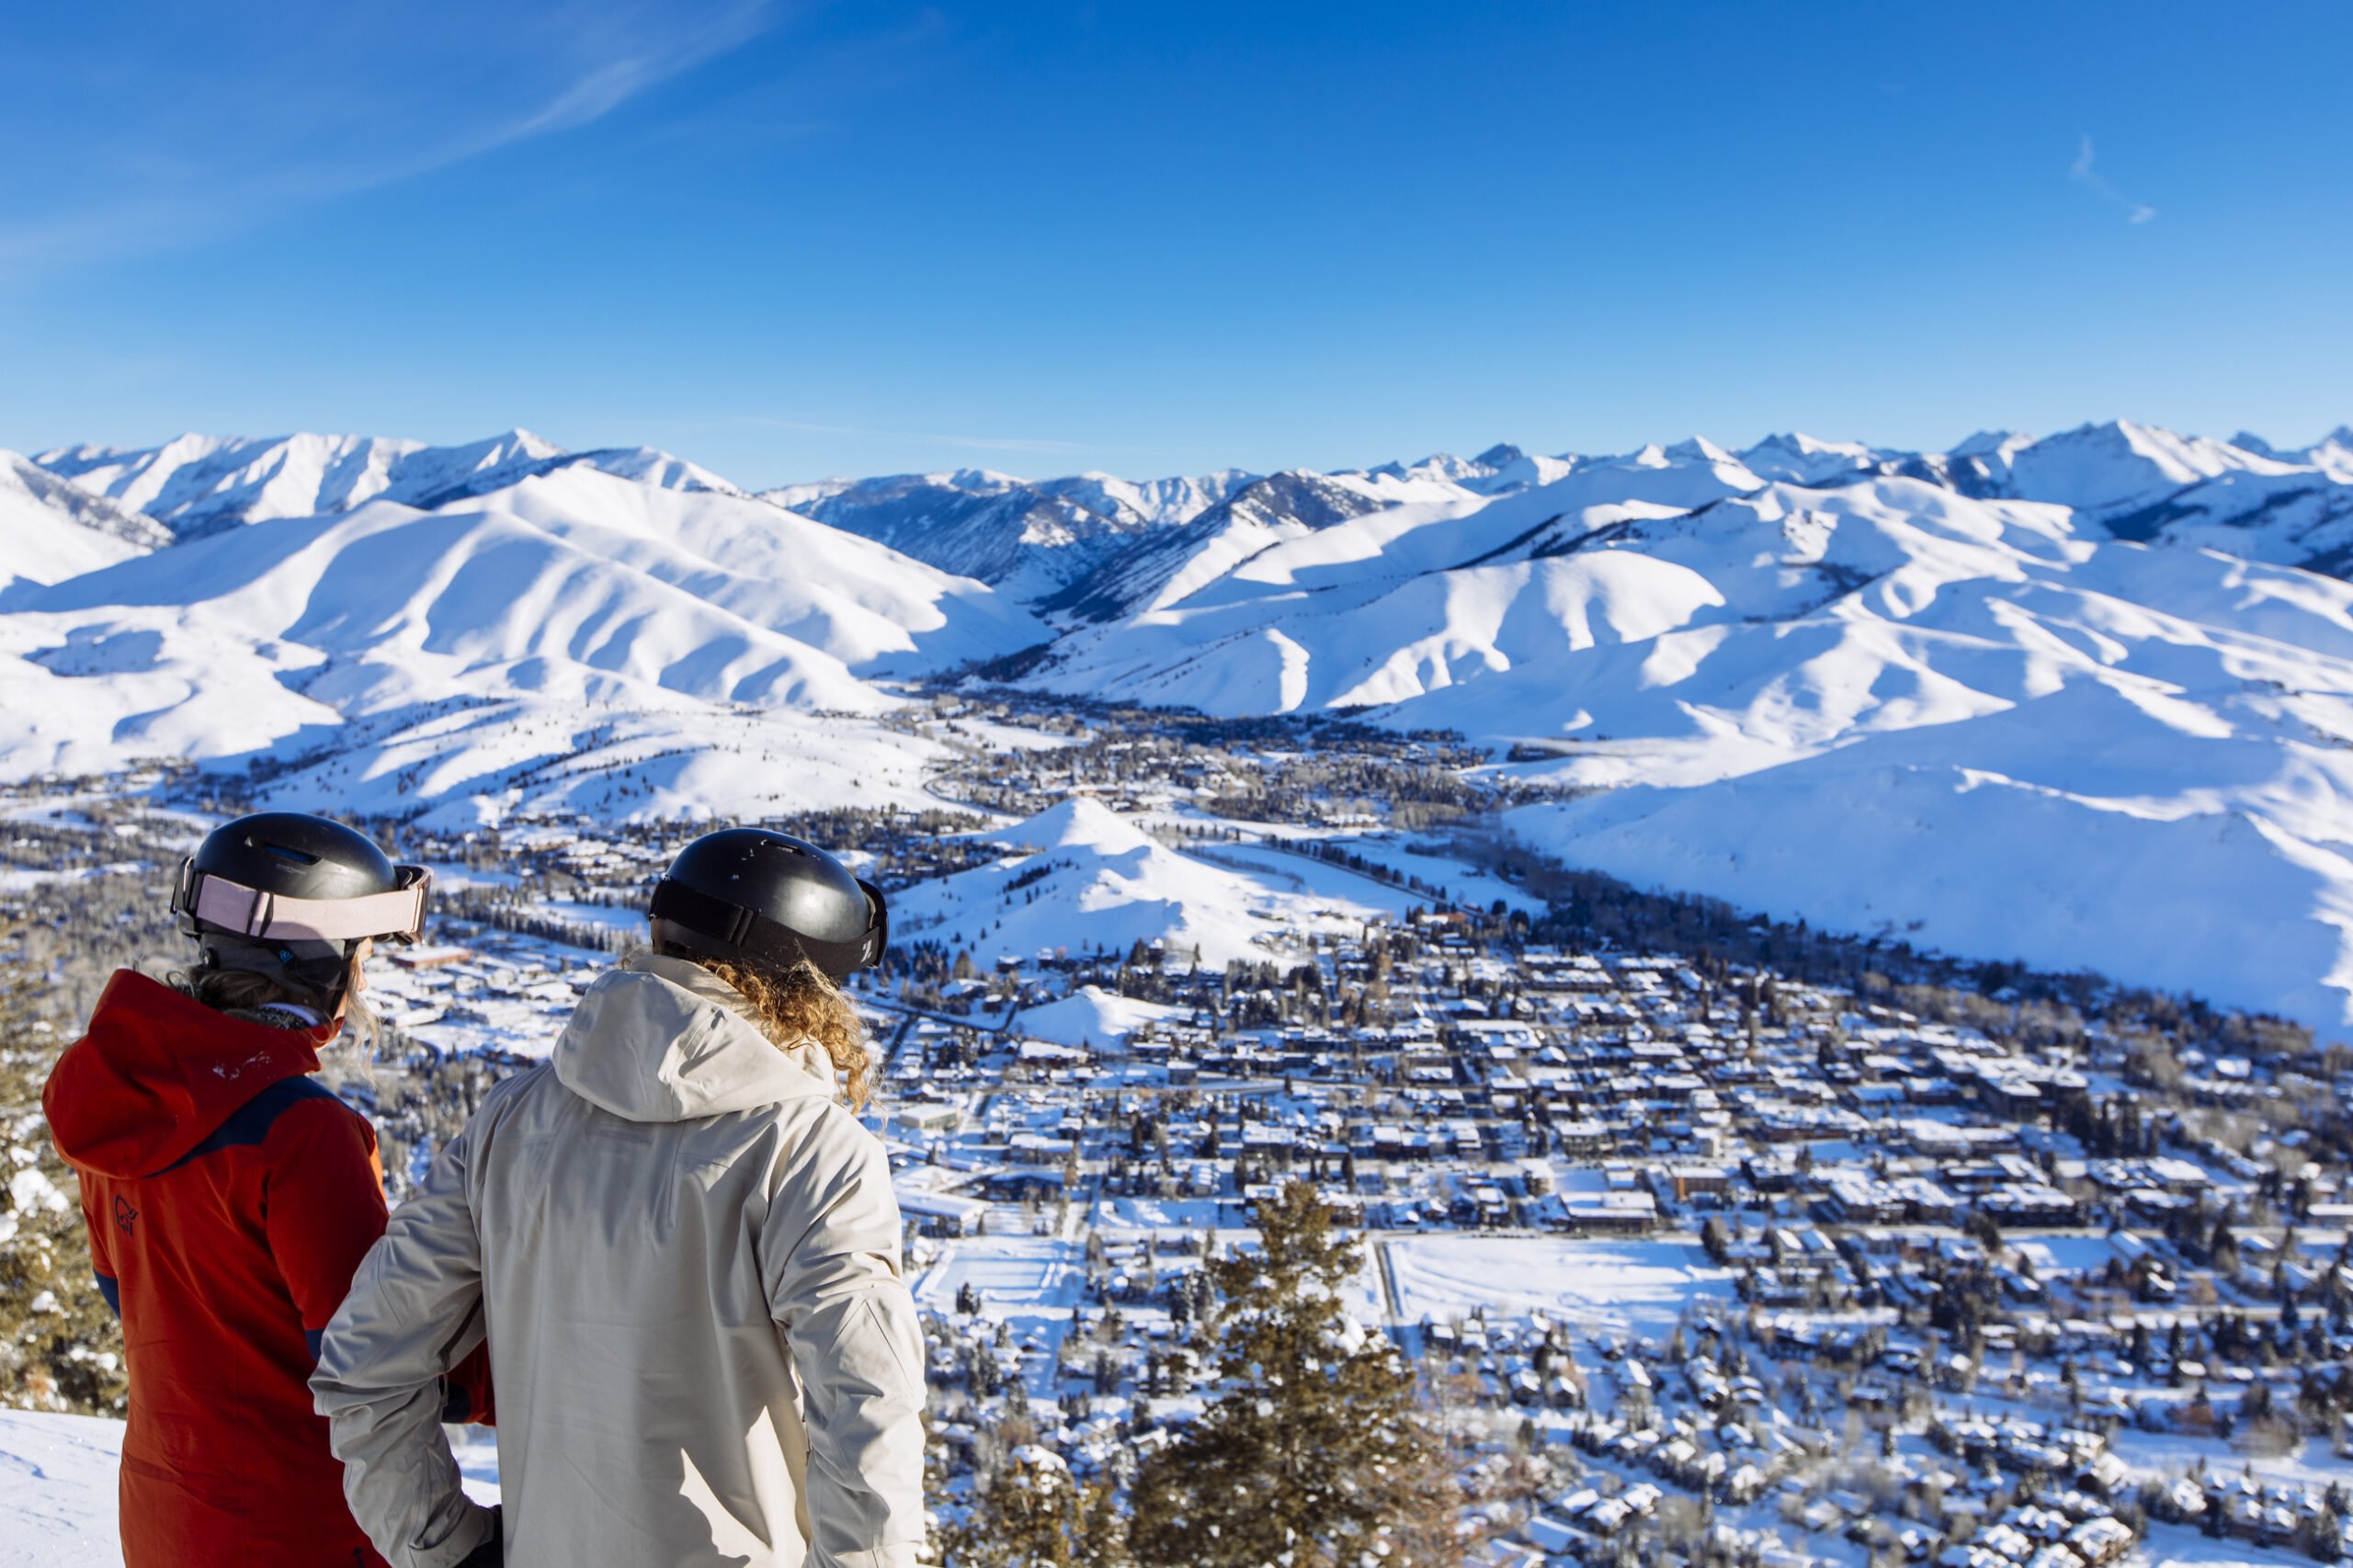 Winter vacation in Sun Valley, Idaho looking down at Ketchum from Bald Mountain Resort